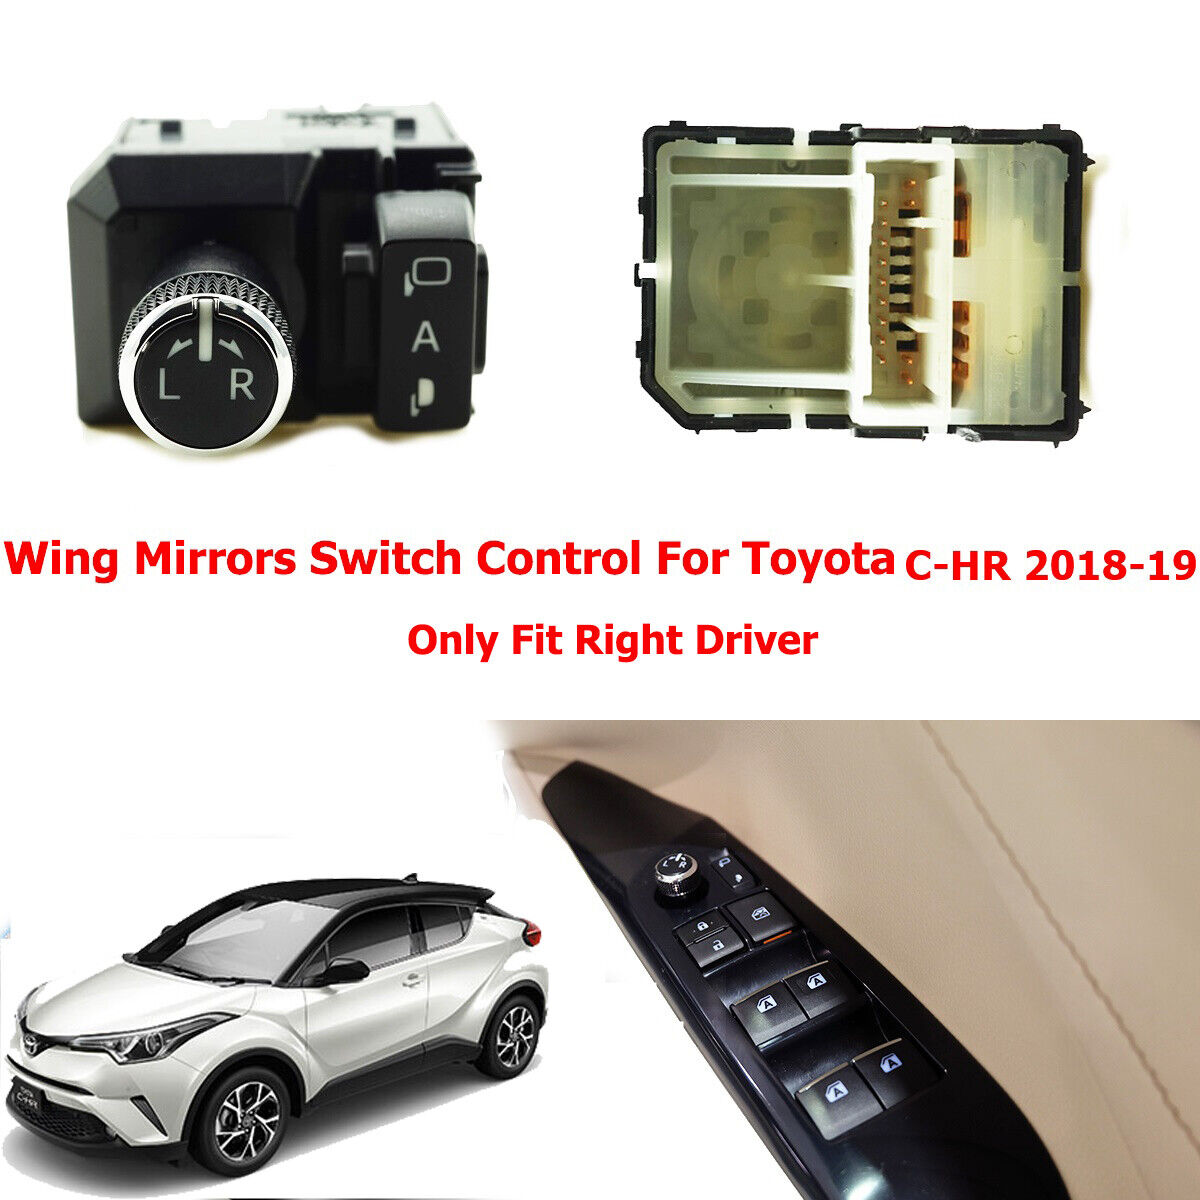 GENUINE PART TOYOTA C-HR 2018-19 WING MIRROR SWITCH FOR RIGHT DRIVER